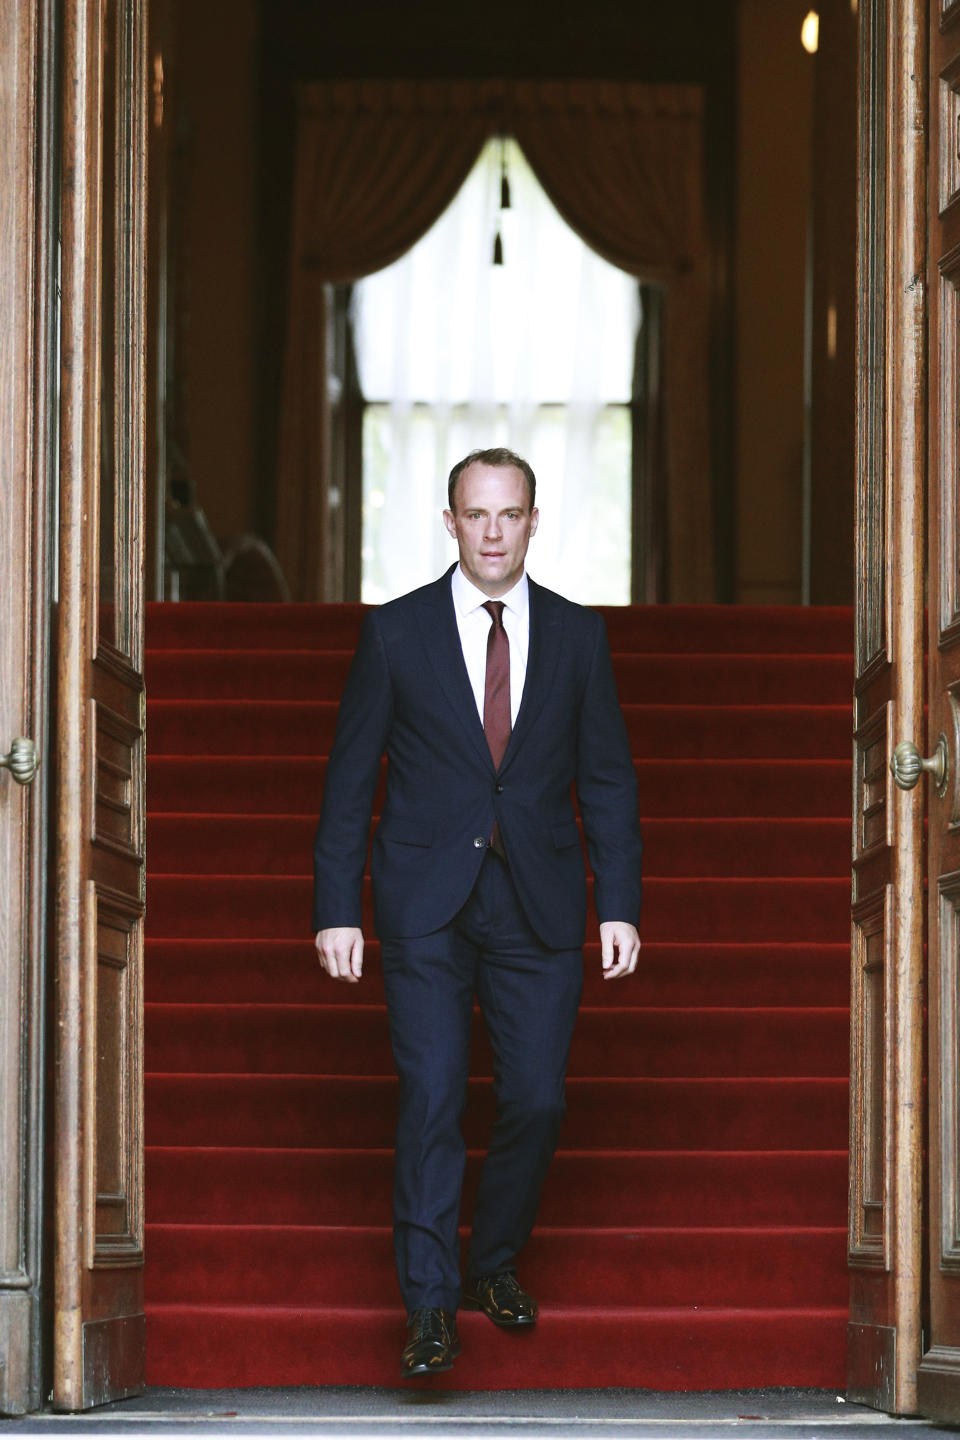 Conservative lawmkaer Dominic Raab is seen at the Foreign and Commonwealth building after being appointed as the Foreign Secretary by new Prime Minister Boris Johnson, on Wednesday, July 24, 2019 in London. Dominic Raab has been named Britain's foreign secretary, the country's top diplomat and one of the most senior roles in government. Raab is a former Brexit secretary and a staunch supporter of Britain's exit from the European Union. (Dan Kitwood/Pool Photo via AP)